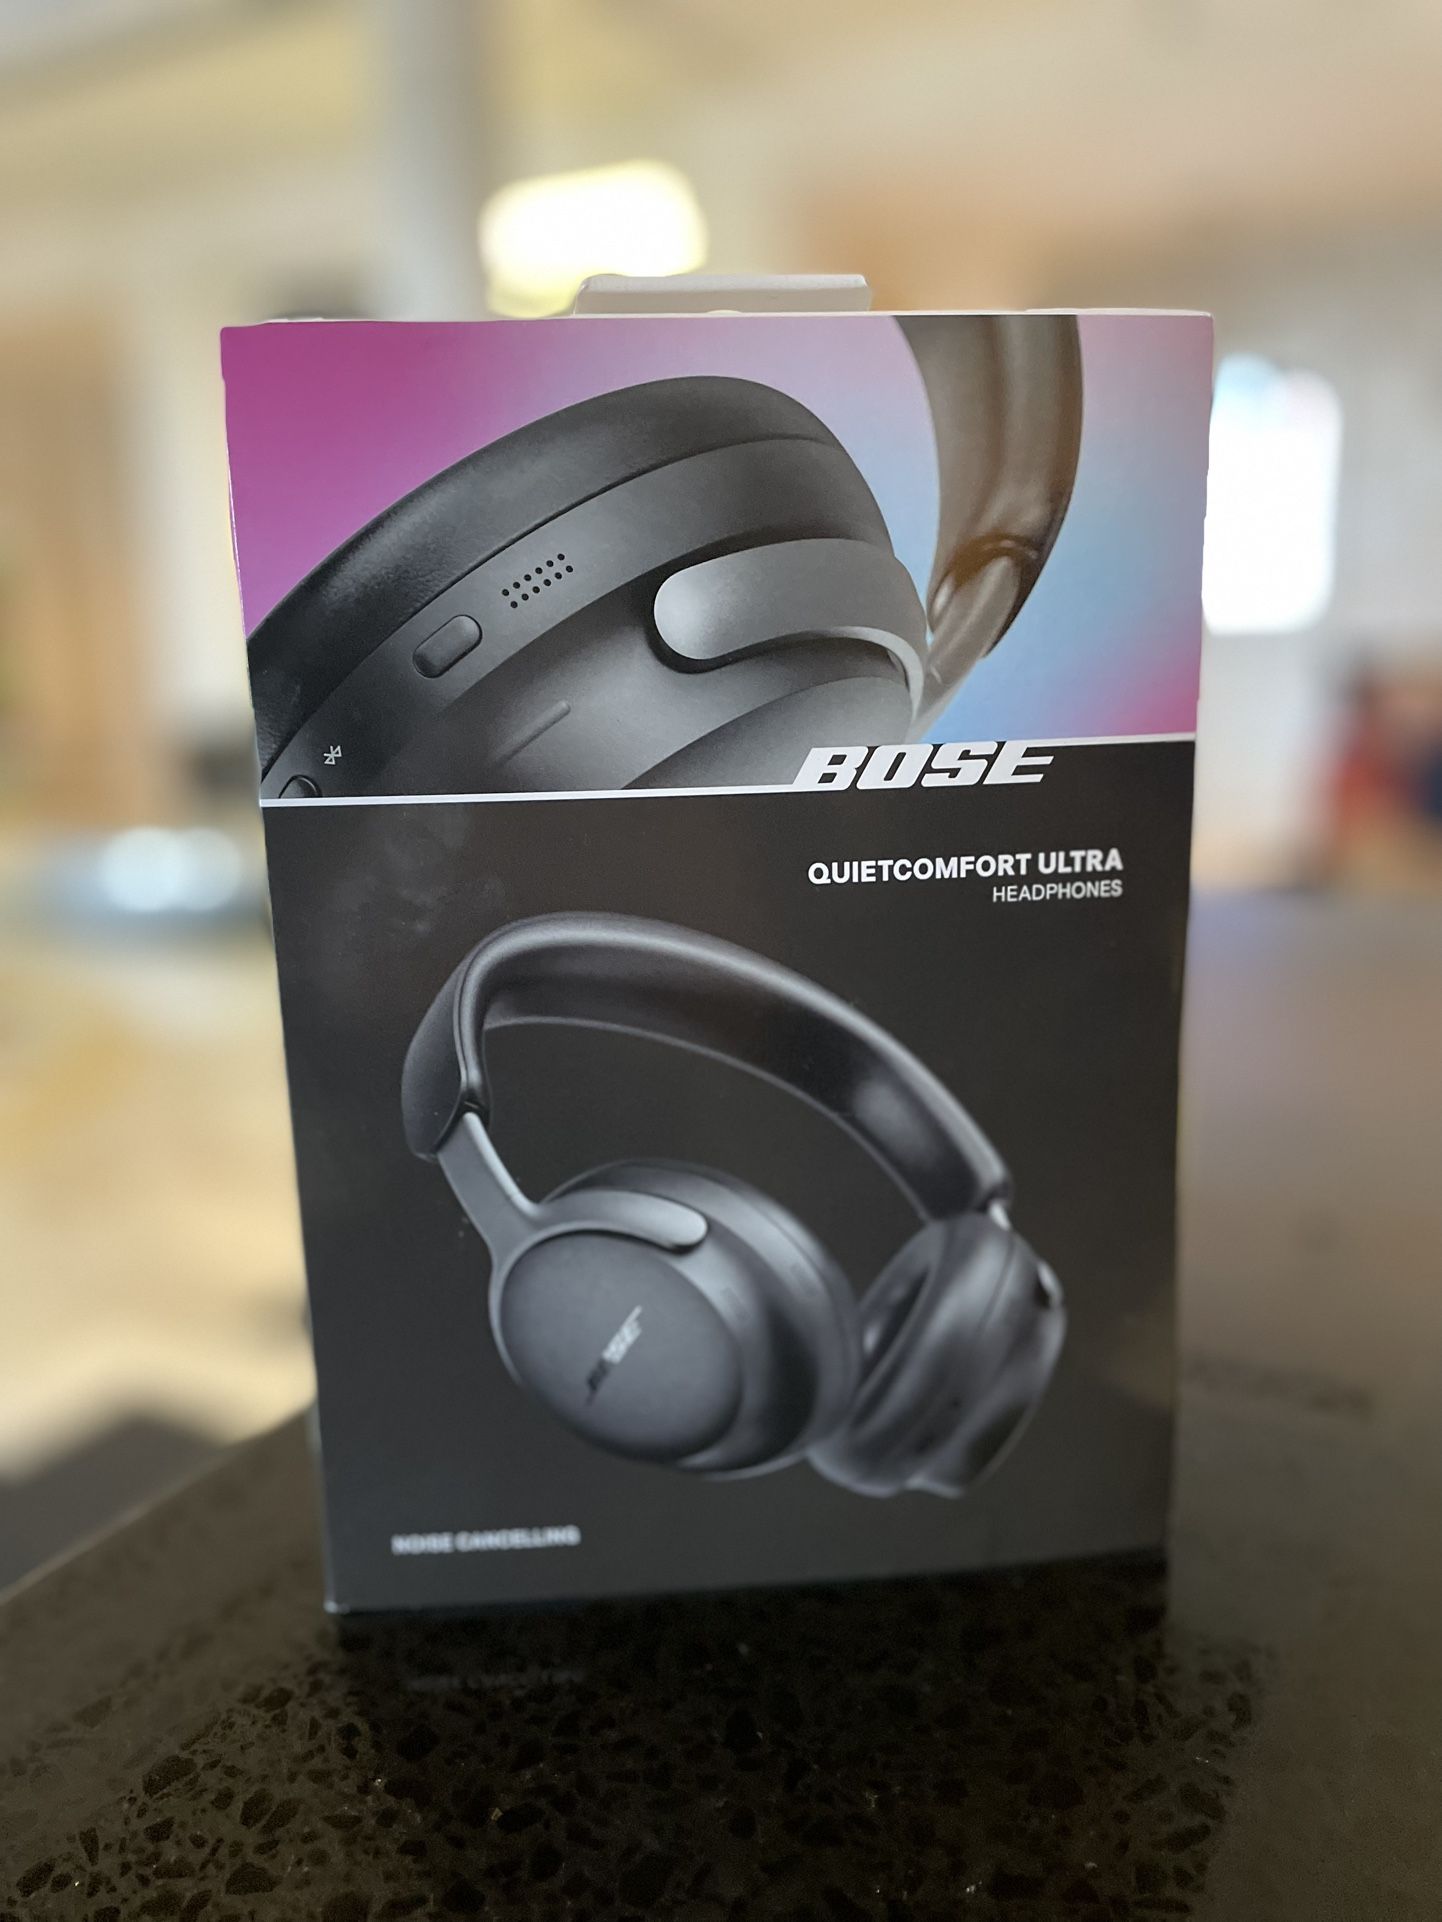 NEW Bose QuietComfort Ultra Wireless Noise Cancelling Headphones with Spatial Audio, Over-the-Ear